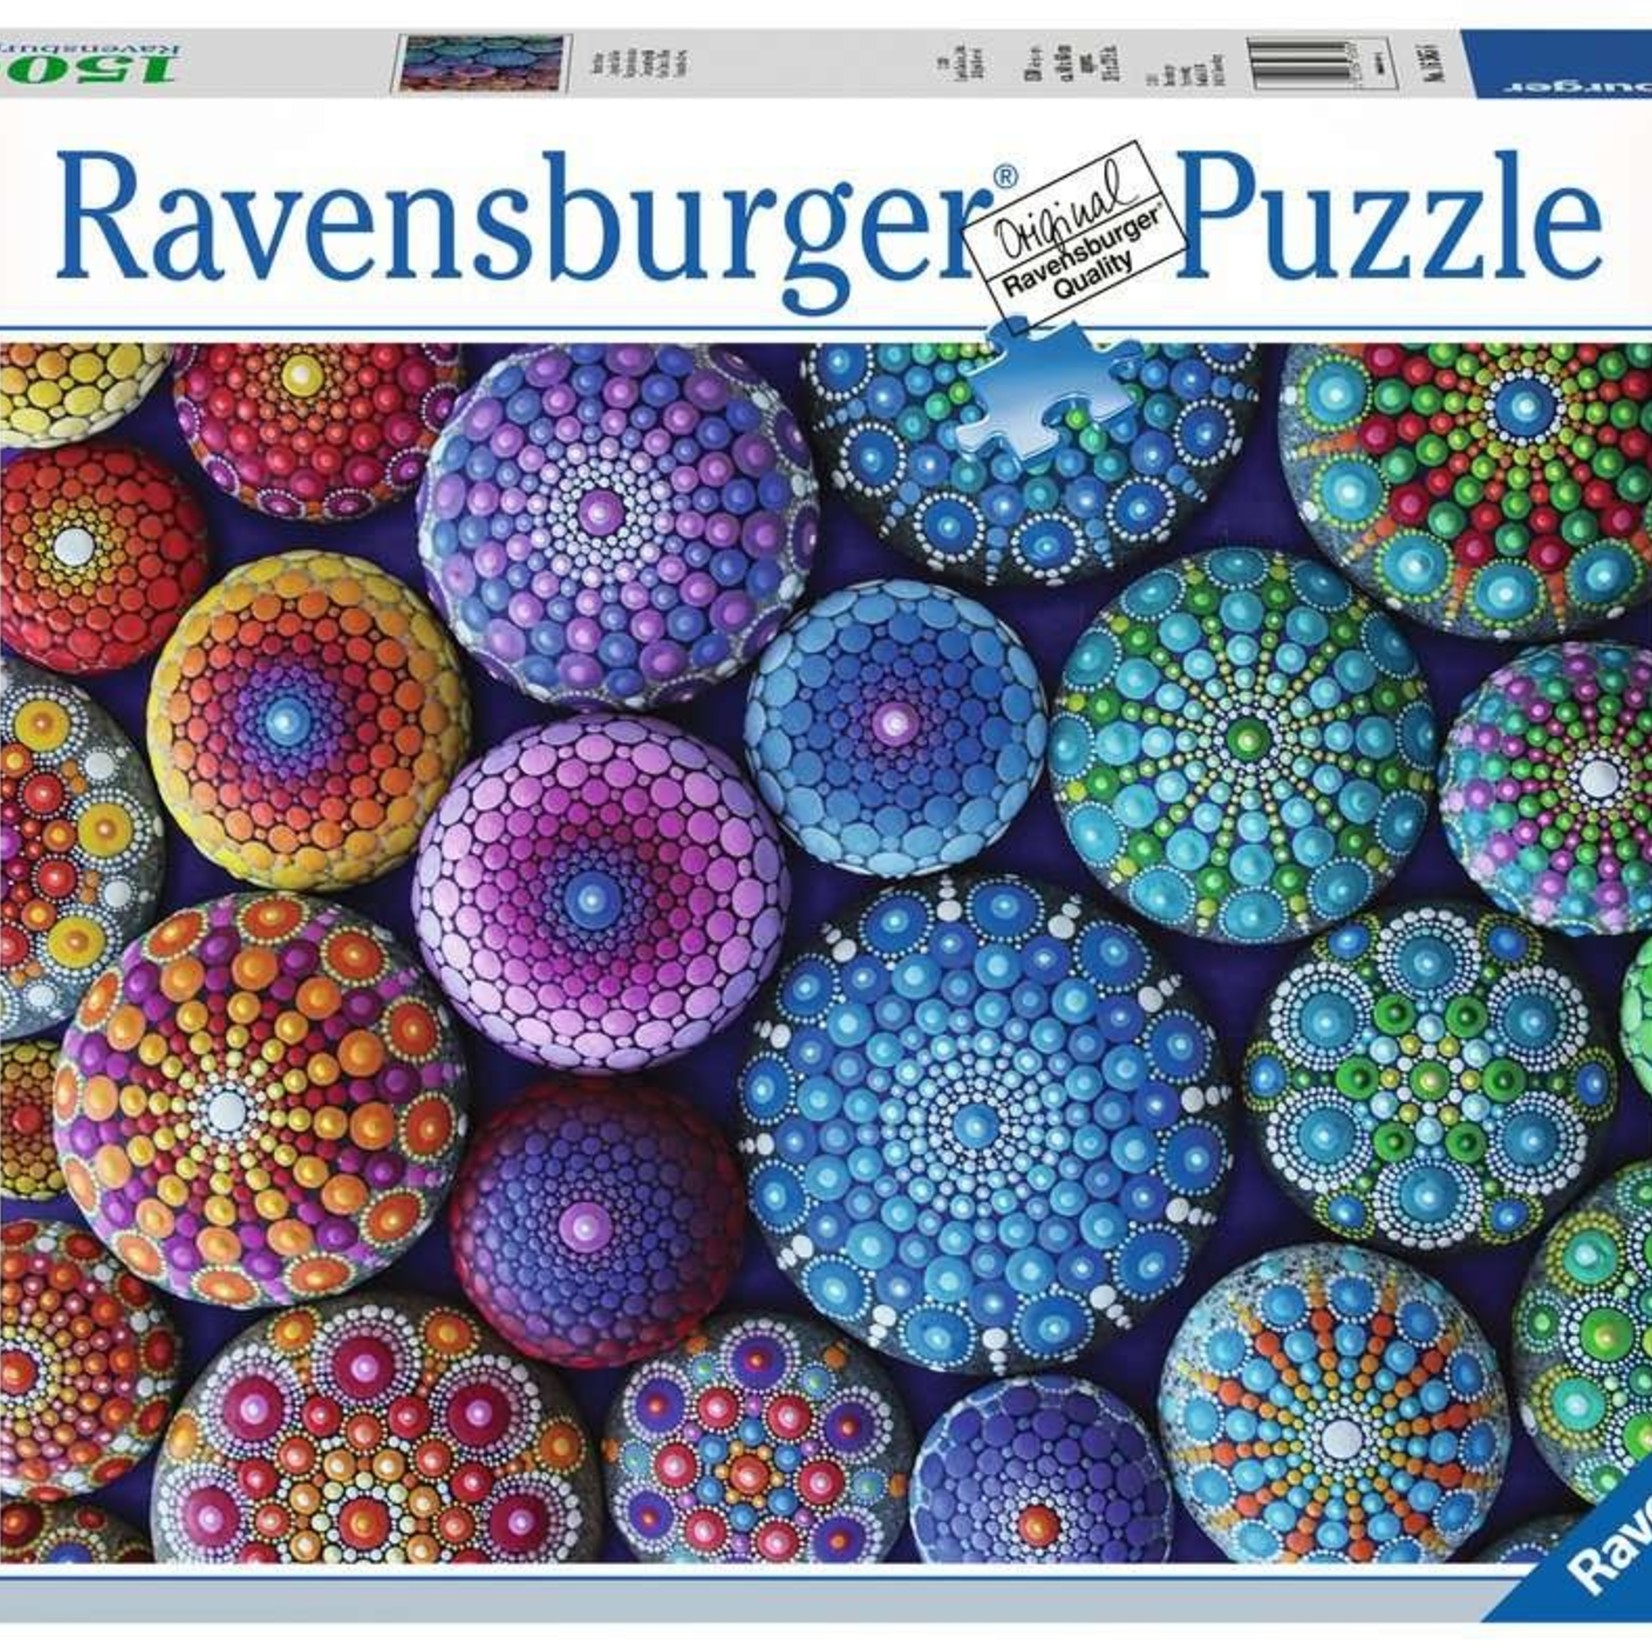 Ravensburger One Dot at a Time - 1500 pc